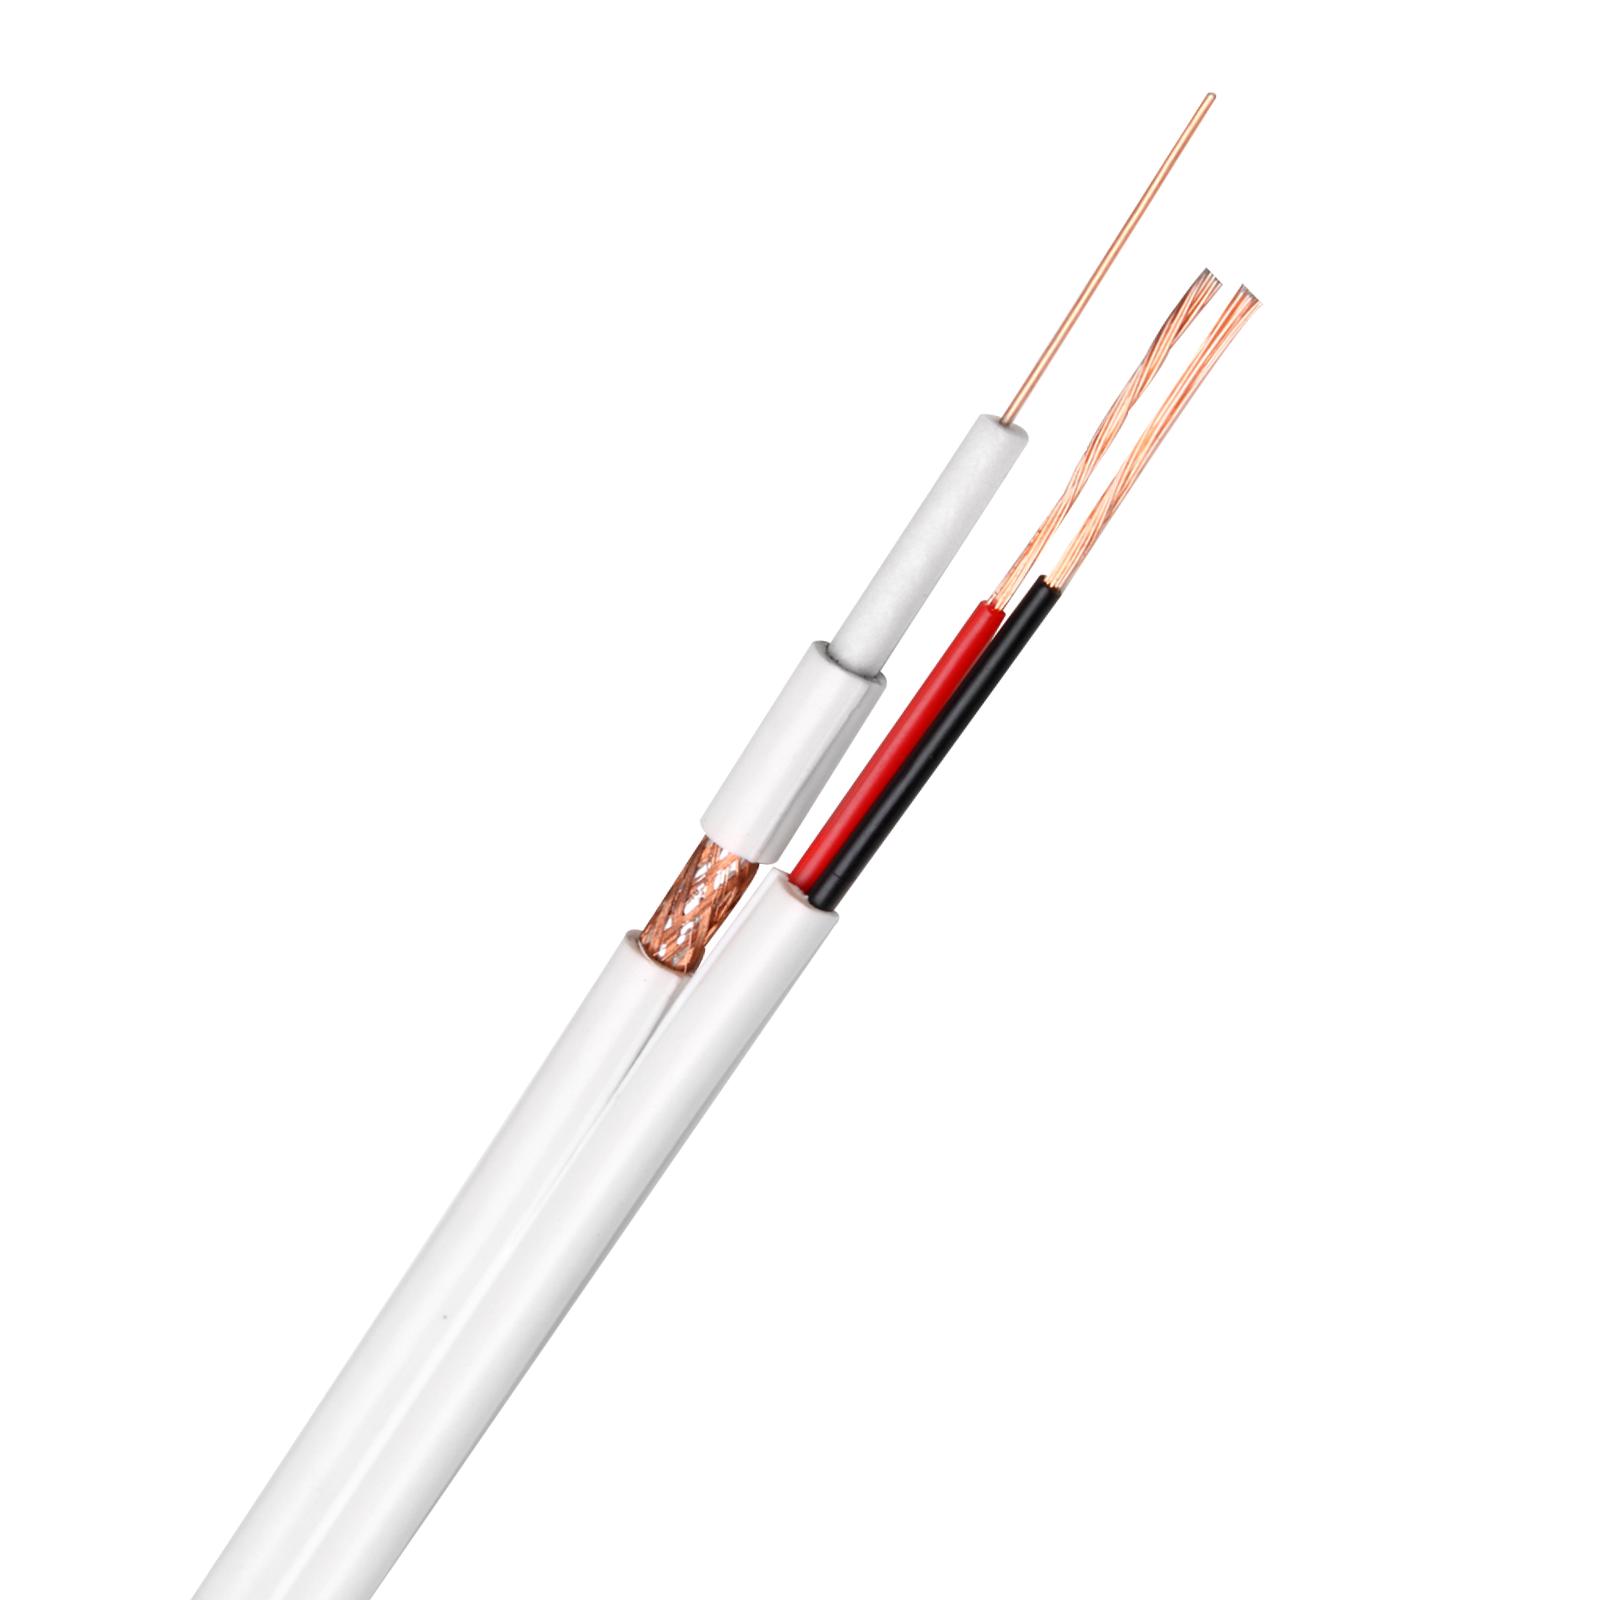 Aston Cable RG59 Coaxial CCTV Cable - High-performance Video Surveillance Solution